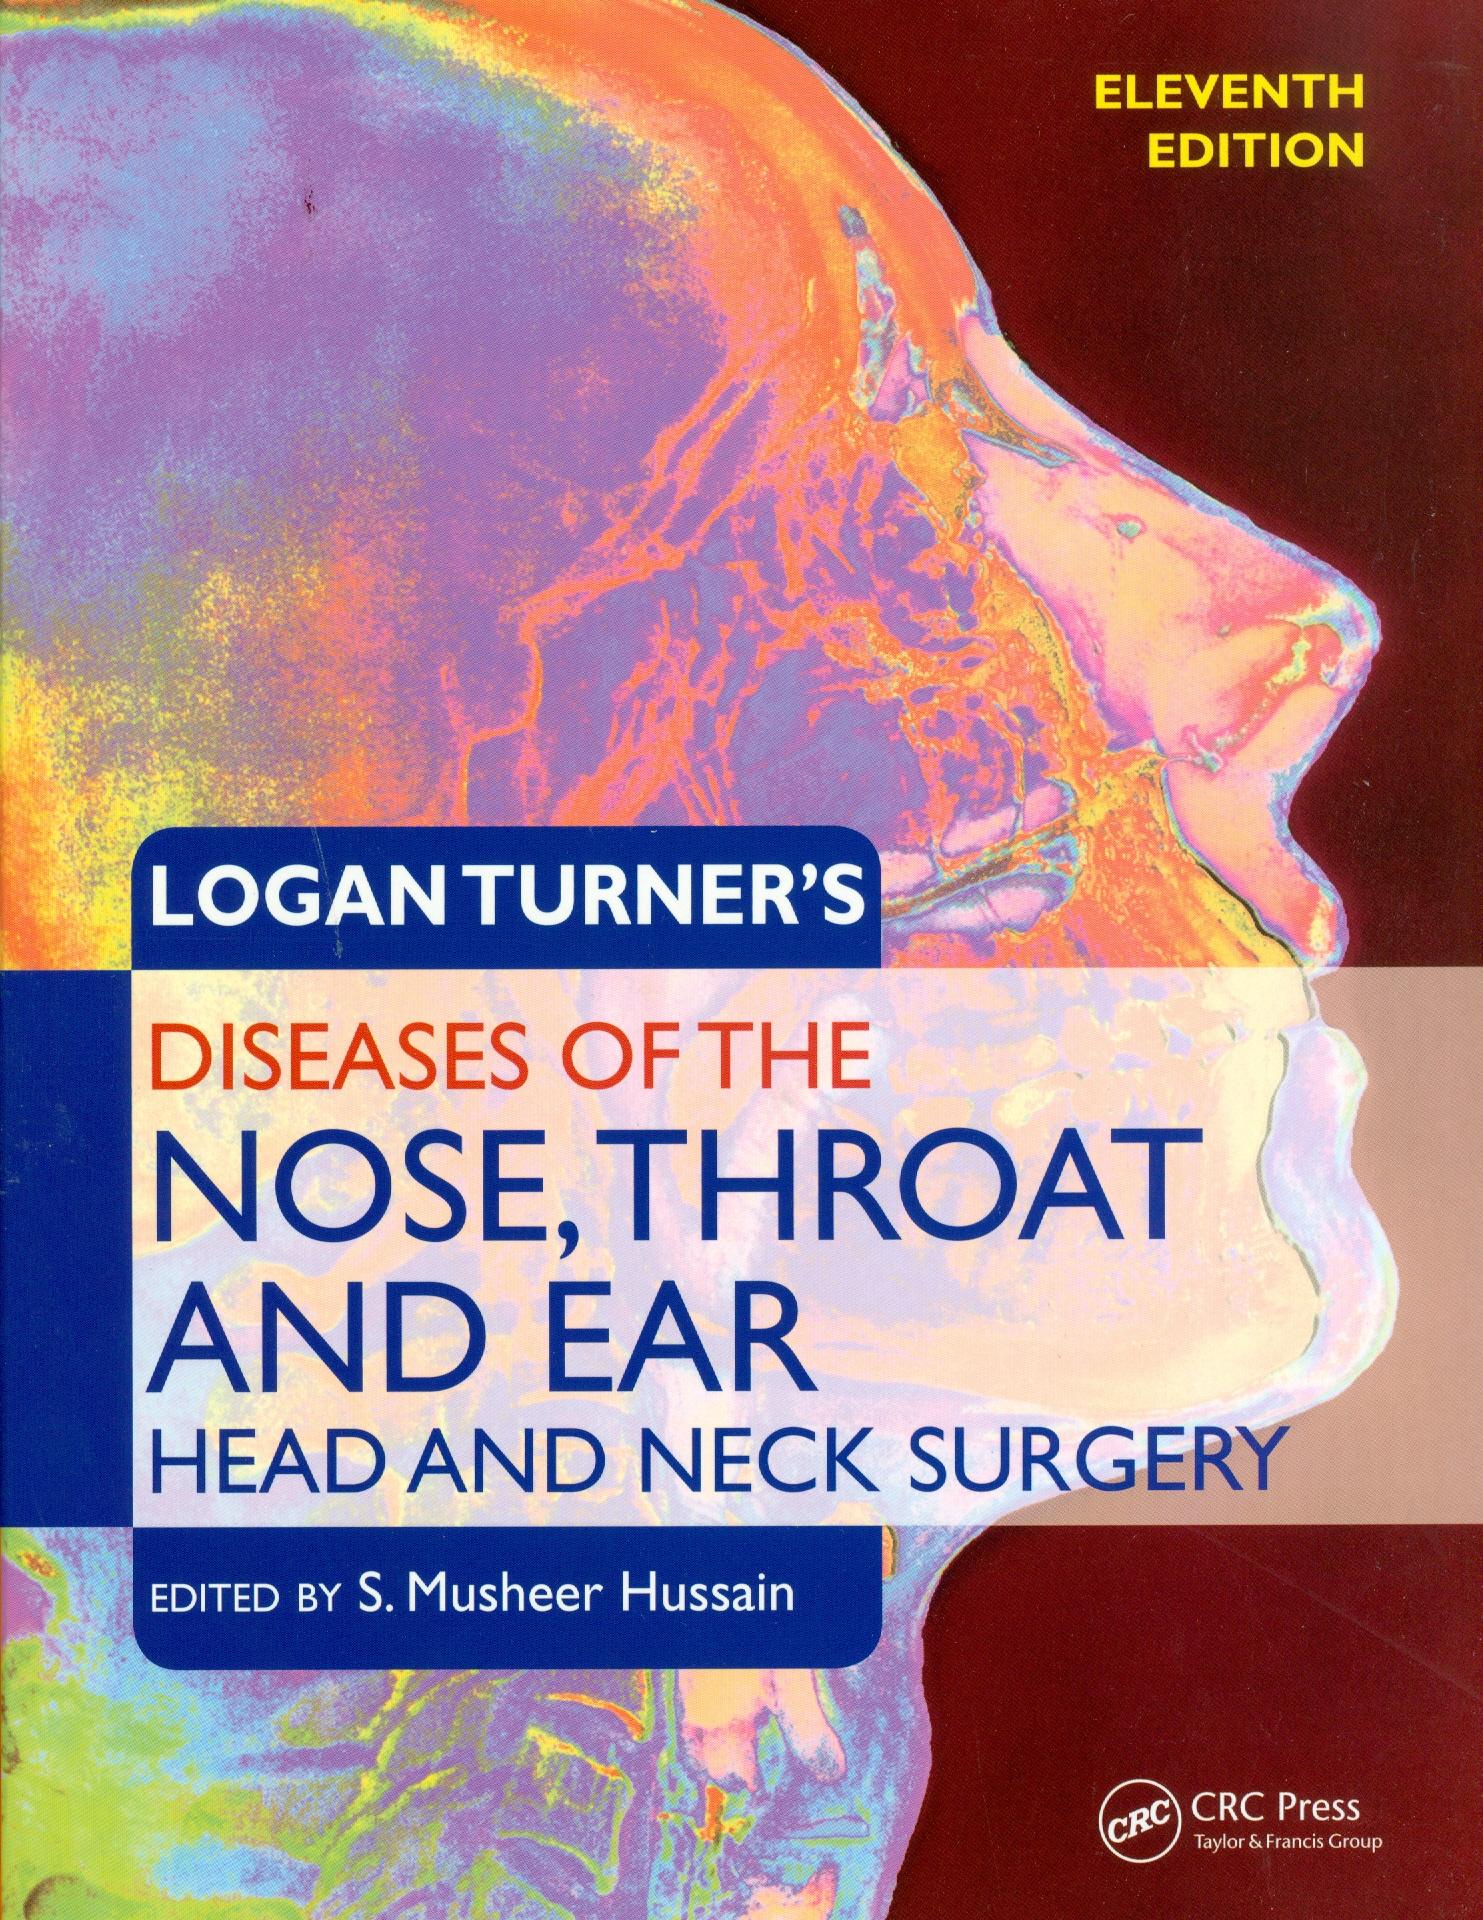 Logan Turner’s Diseases of the Nose, Throat and Ear: Head and Neck Surgery, 11th edition